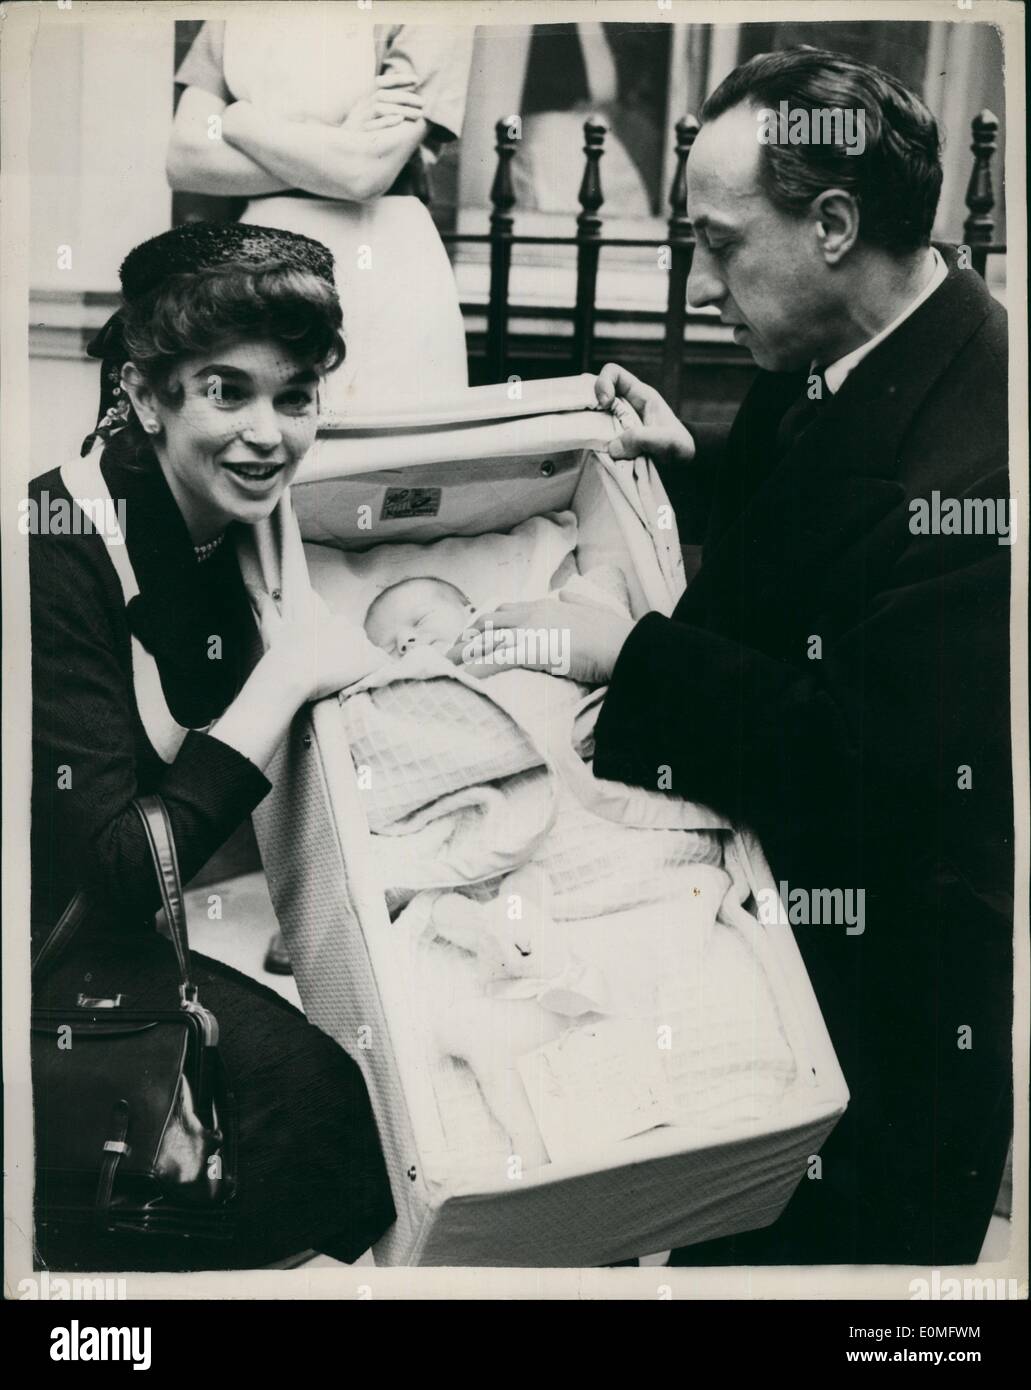 Jan. 01, 1955 - Dawn Addams leaves nursing home with her baby son: Dawn Addams the film star wife of Italian Prince Vittorio Massimo, left the nursing home this morning with her baby son who was born on January 10. Photo shows Dawn Addams with her baby son in a carry cot and her husband Prince Vittorio Massimo seen leaving the nursing home today. Stock Photo